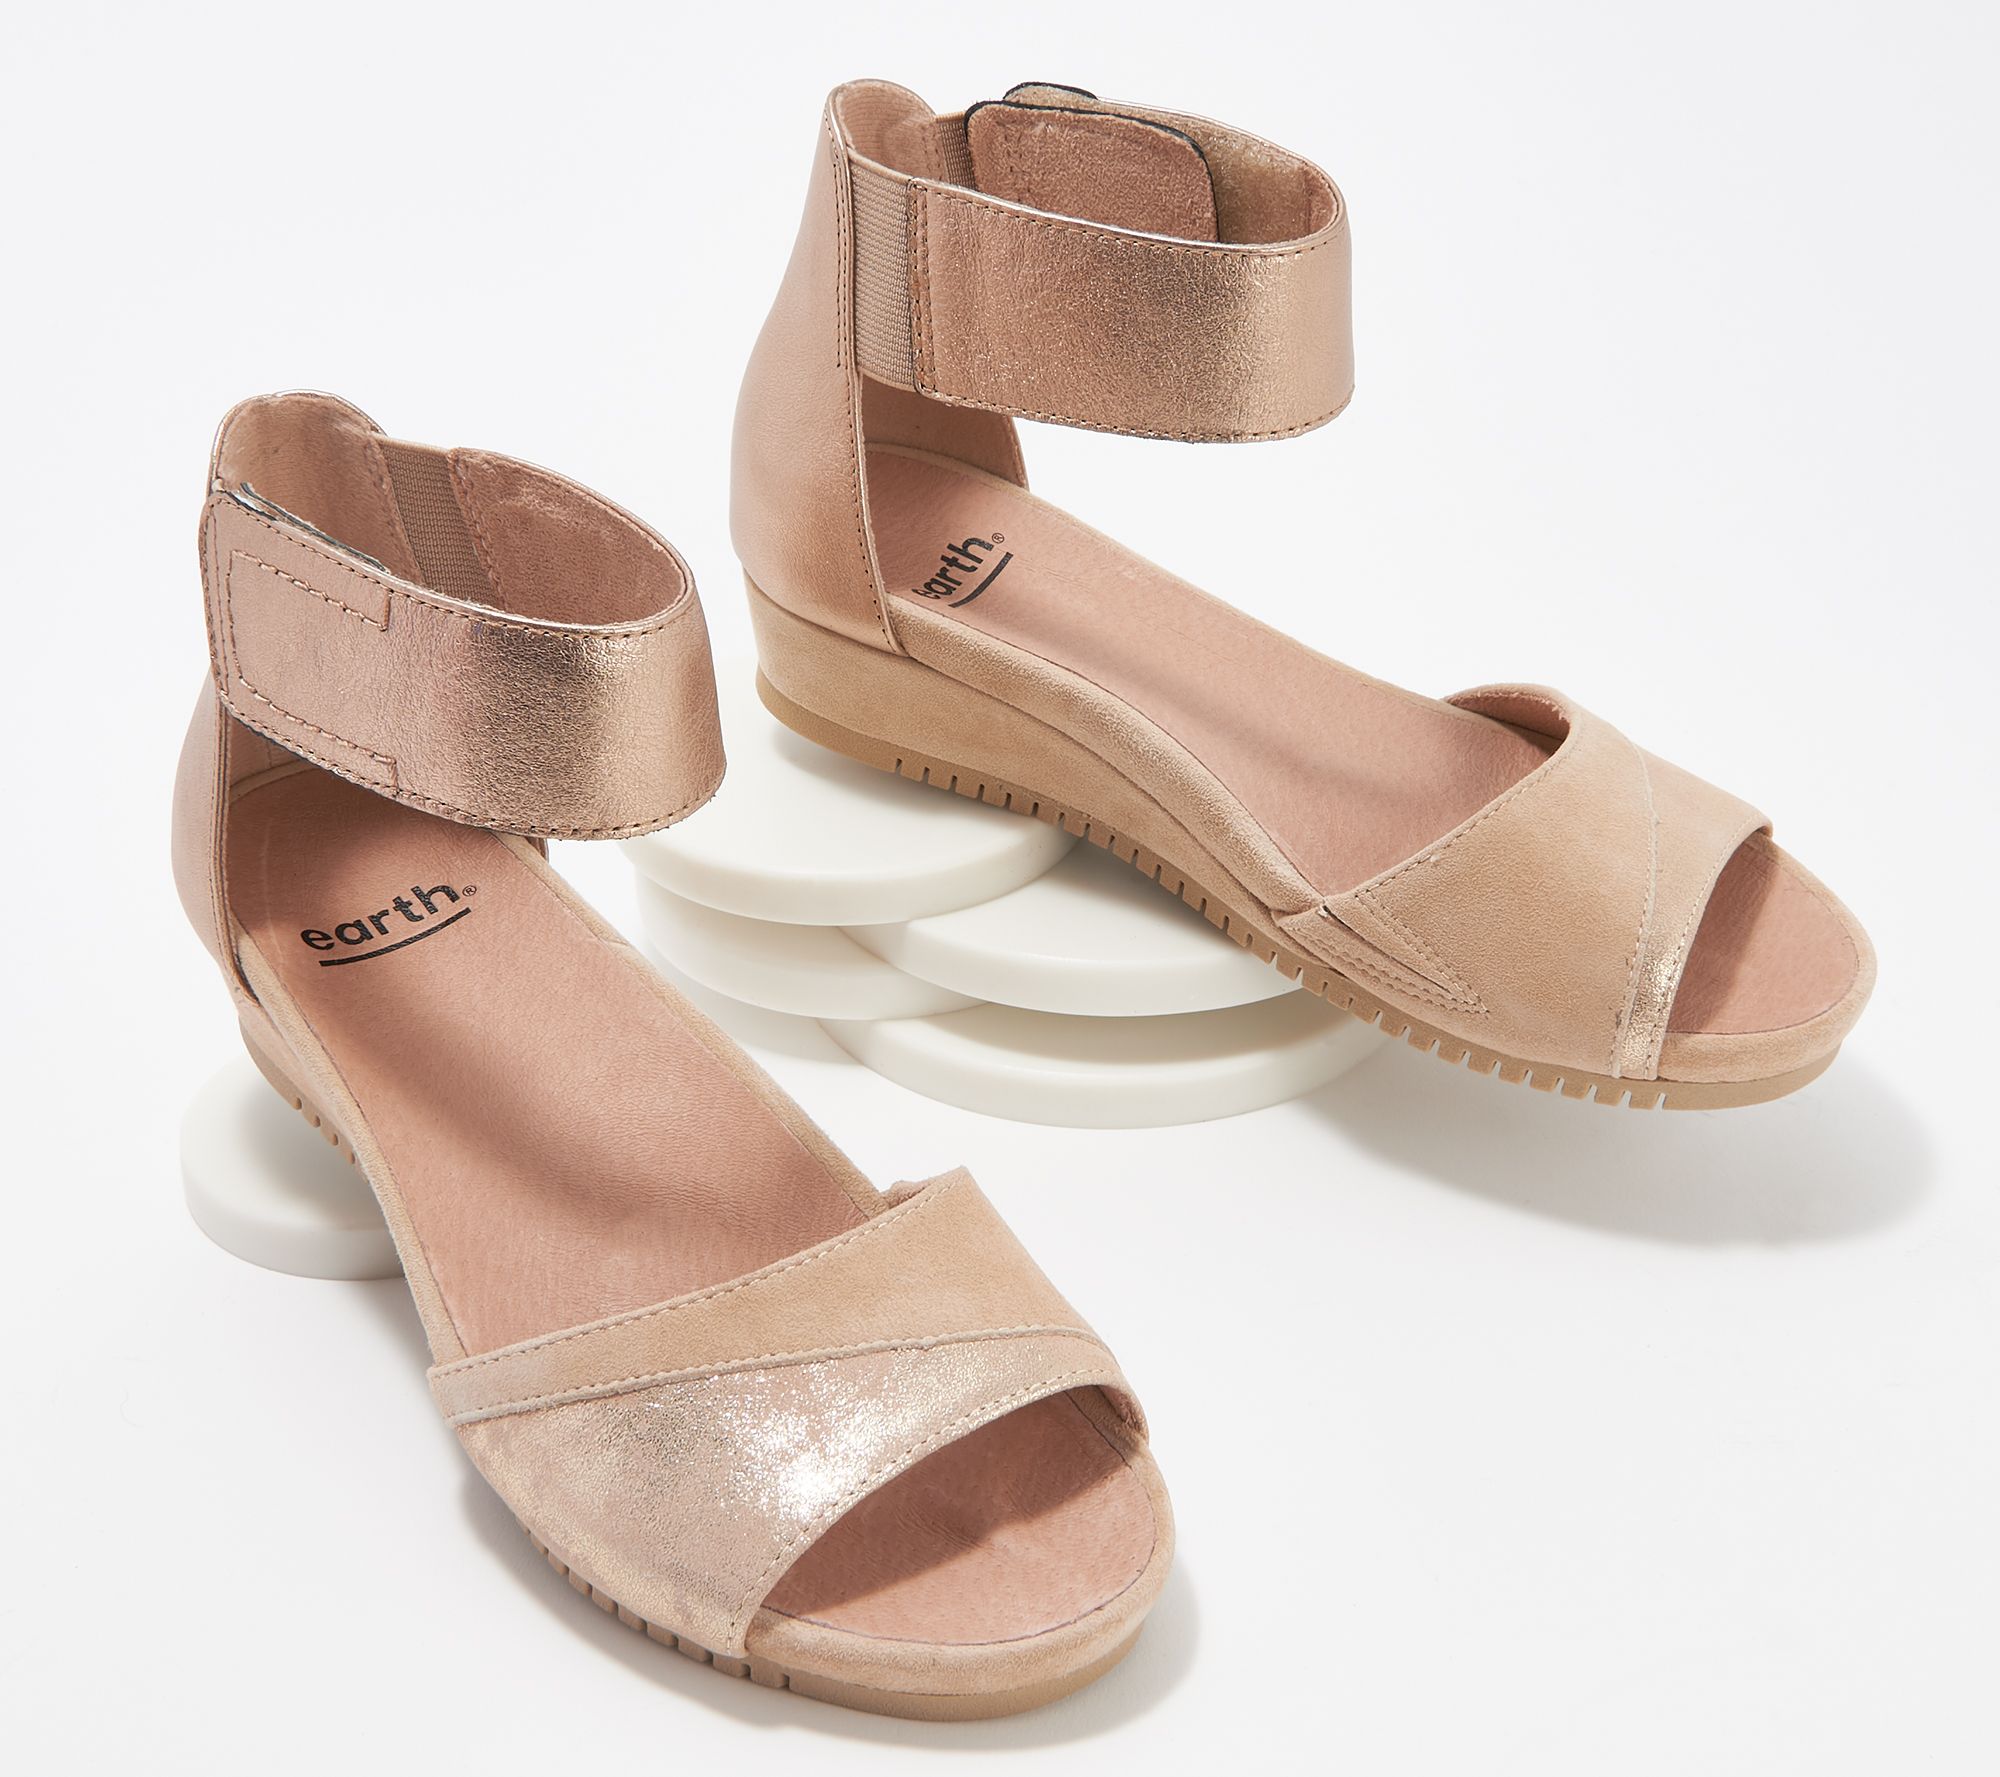 Earth Leather Wedge Sandals - Ficus 